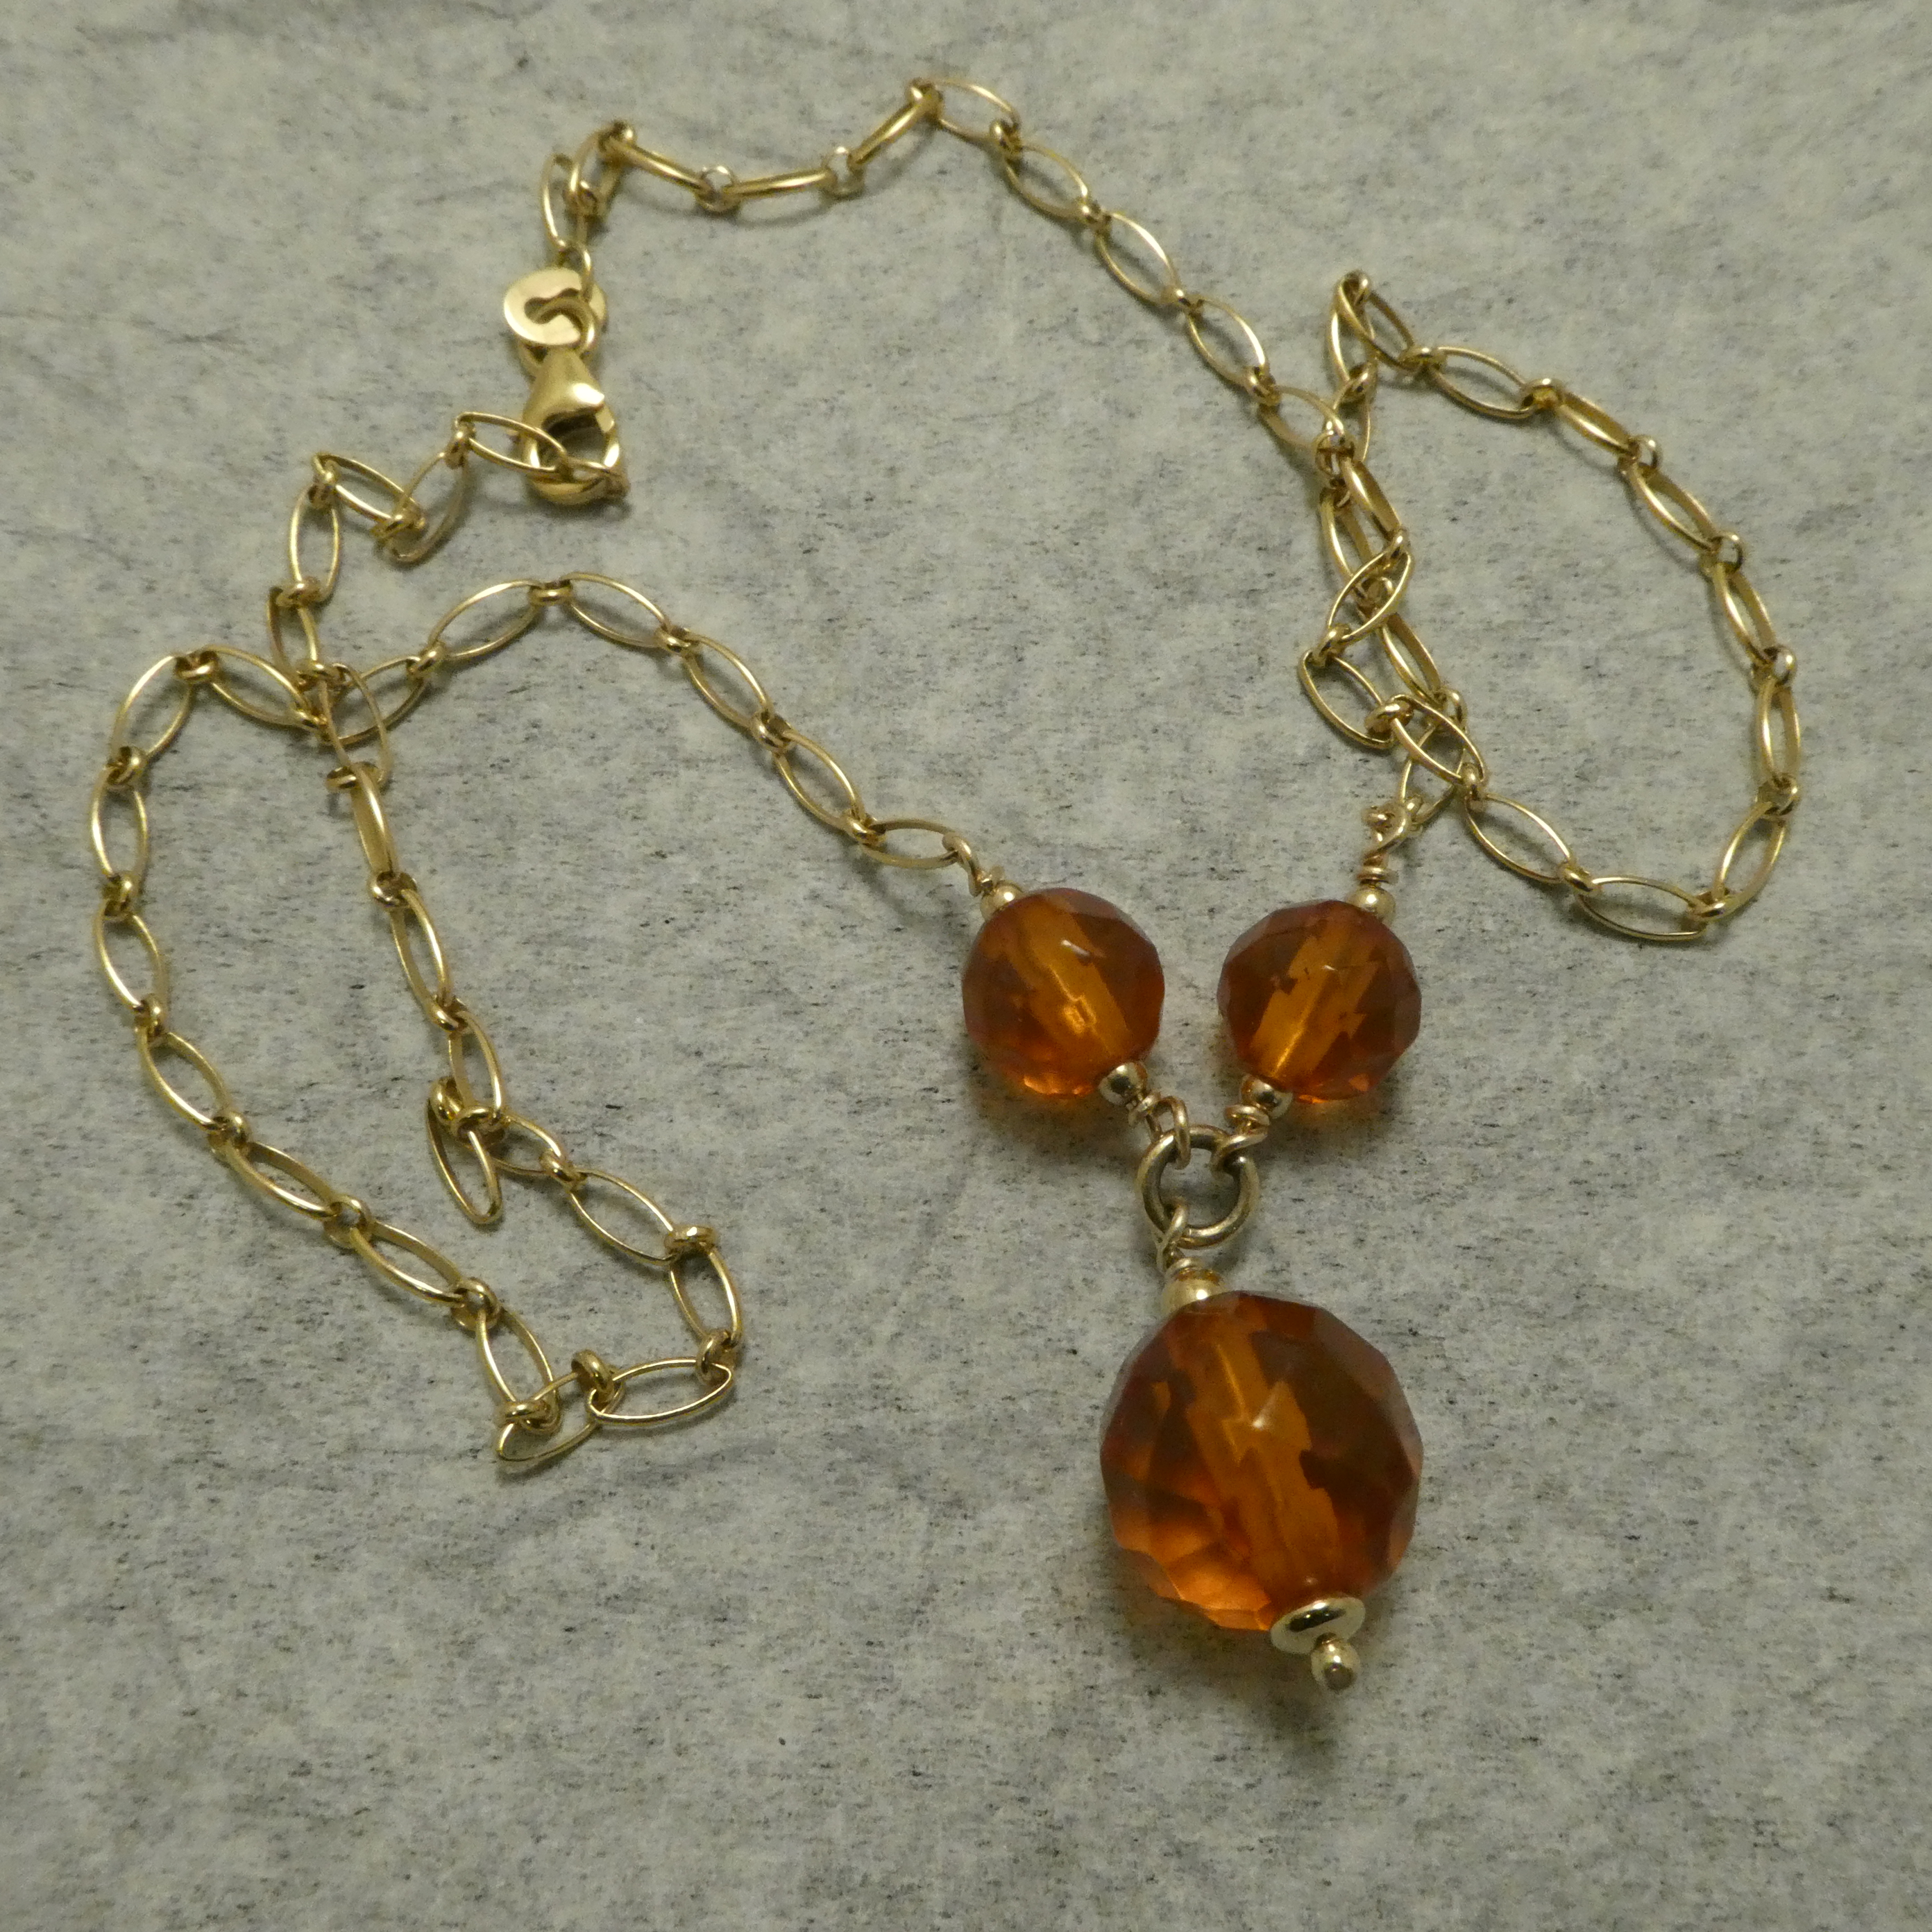 Vintage Unsigned Beaded Honey Baltic Amber Necklace with Screw Clasp